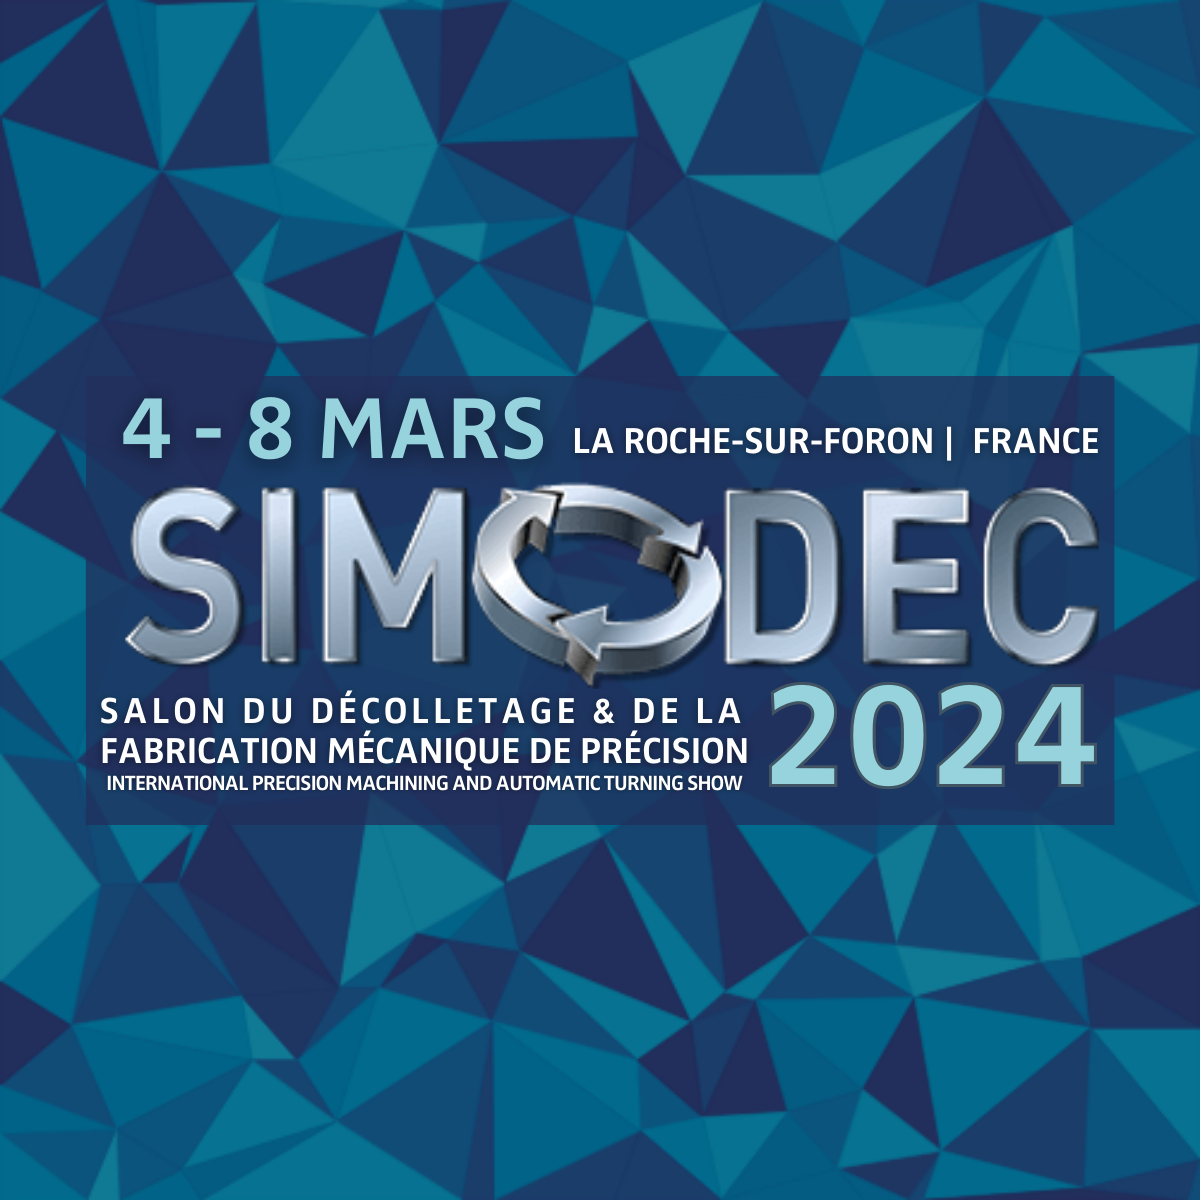 Simodec 2024 – Meeting place for professionals in the precision engineering industry.